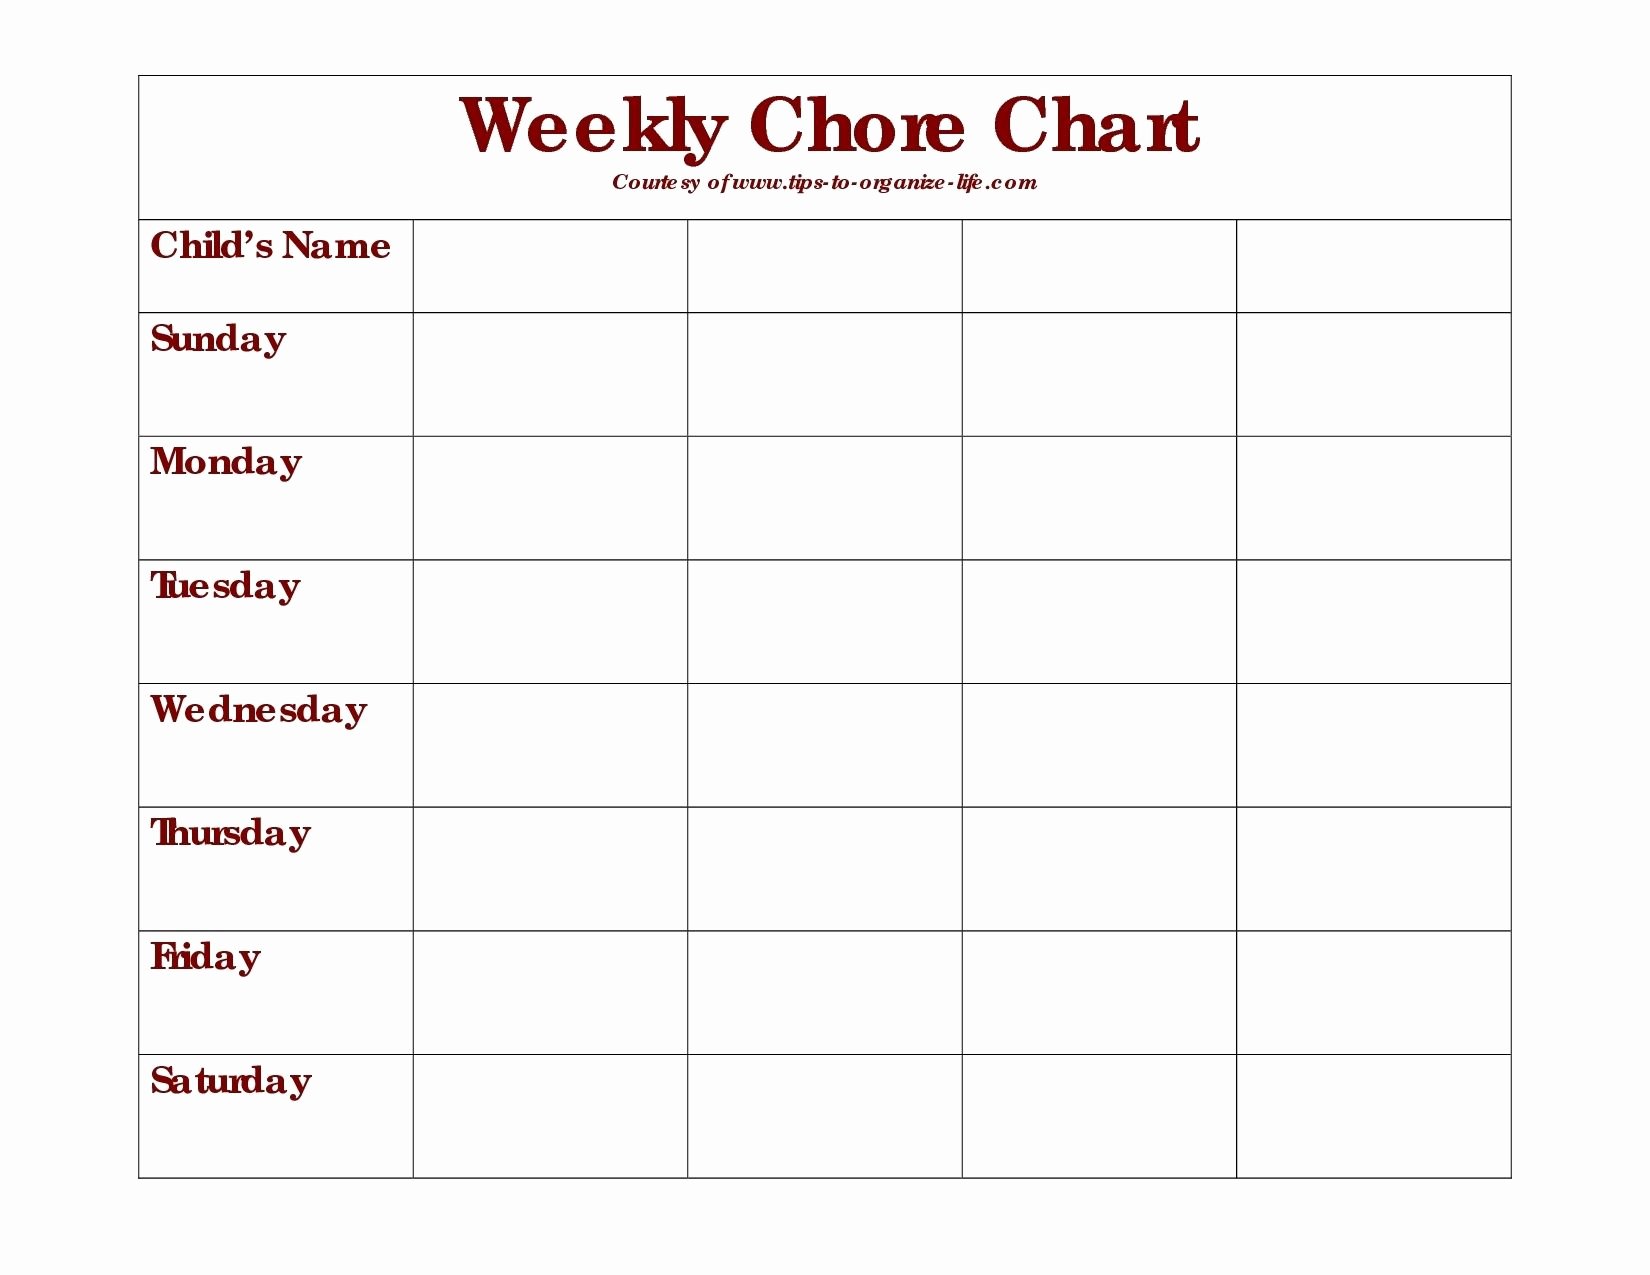 Daily Chore Chart Template Beautiful Daily Chore Chart Printable Ibovnathandedecker within